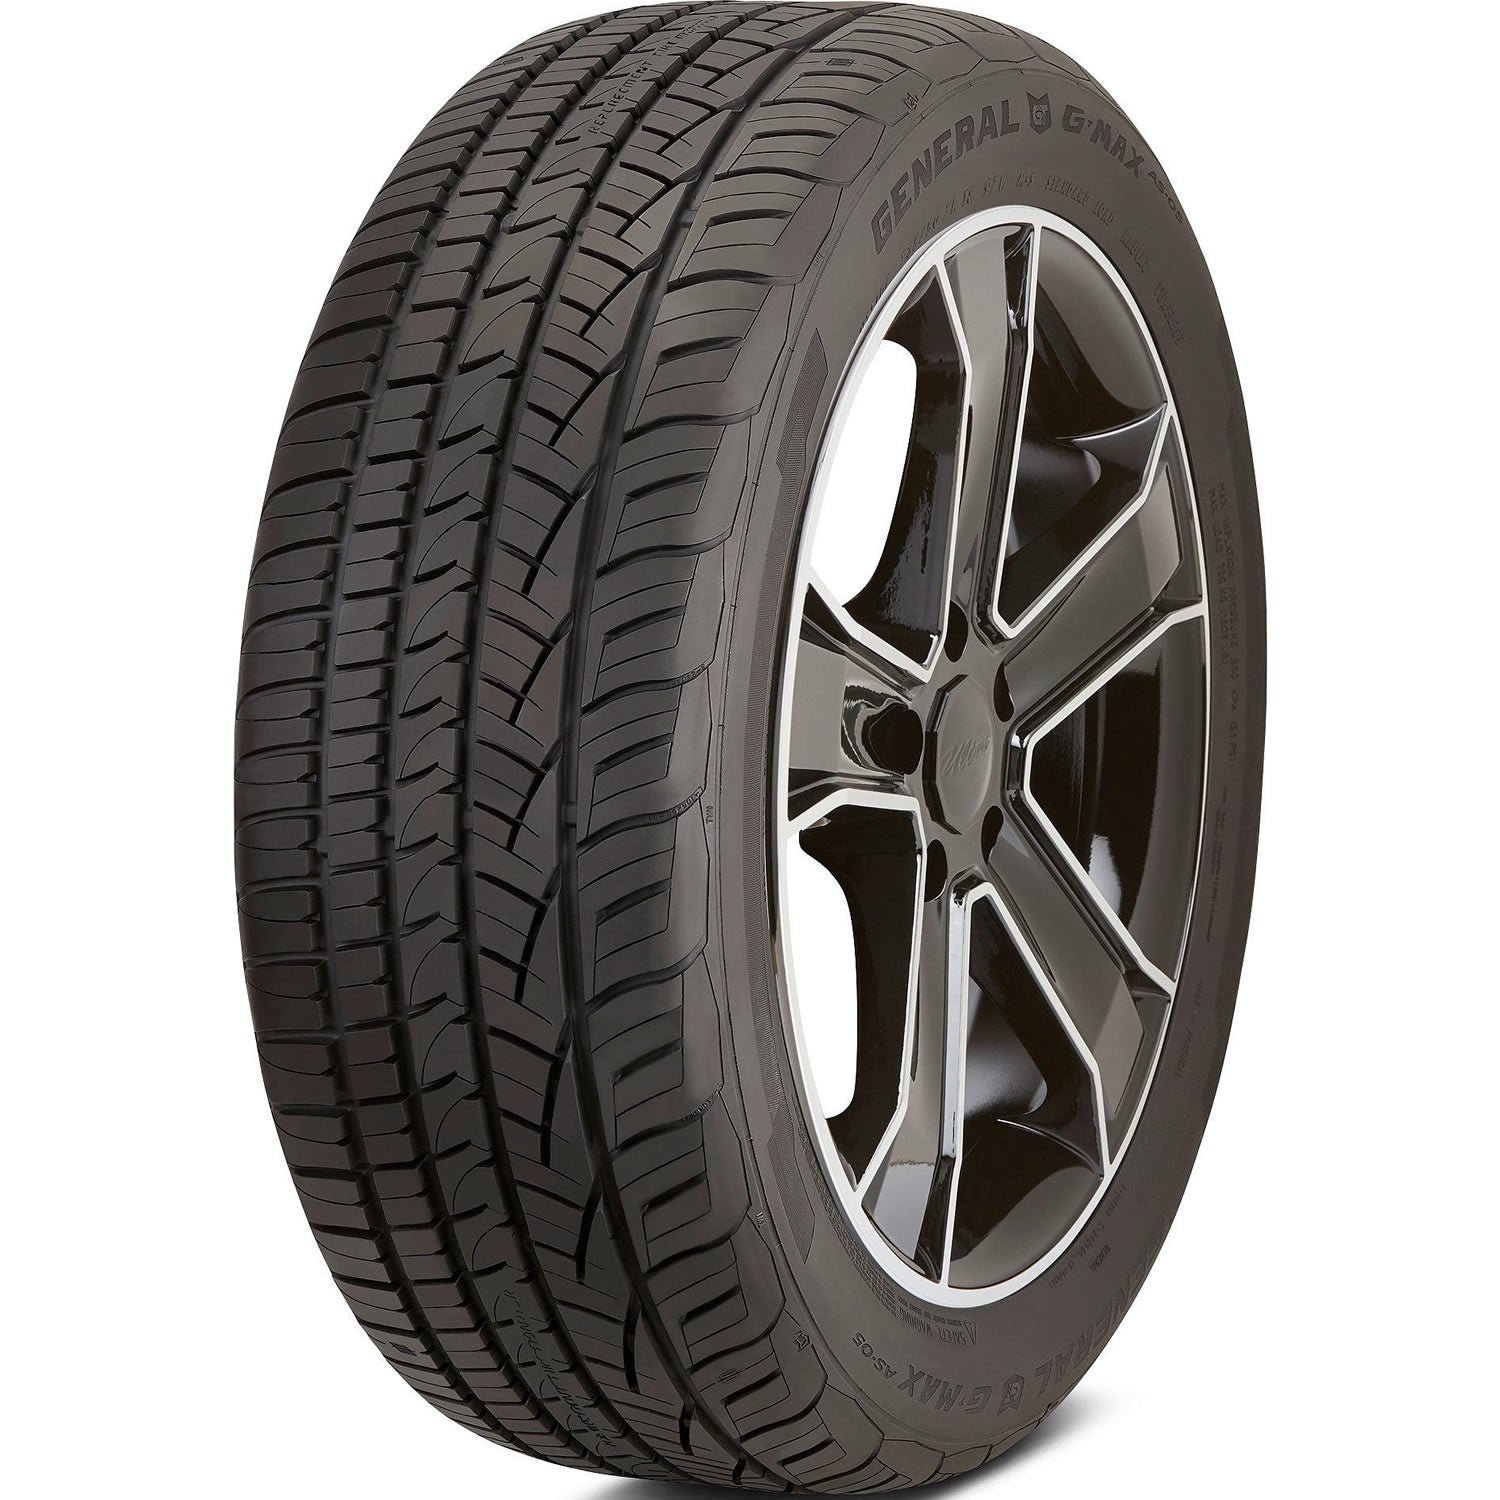 GENERAL G-MAX AS-05 255/50ZR19 (29X10R 19) Tires